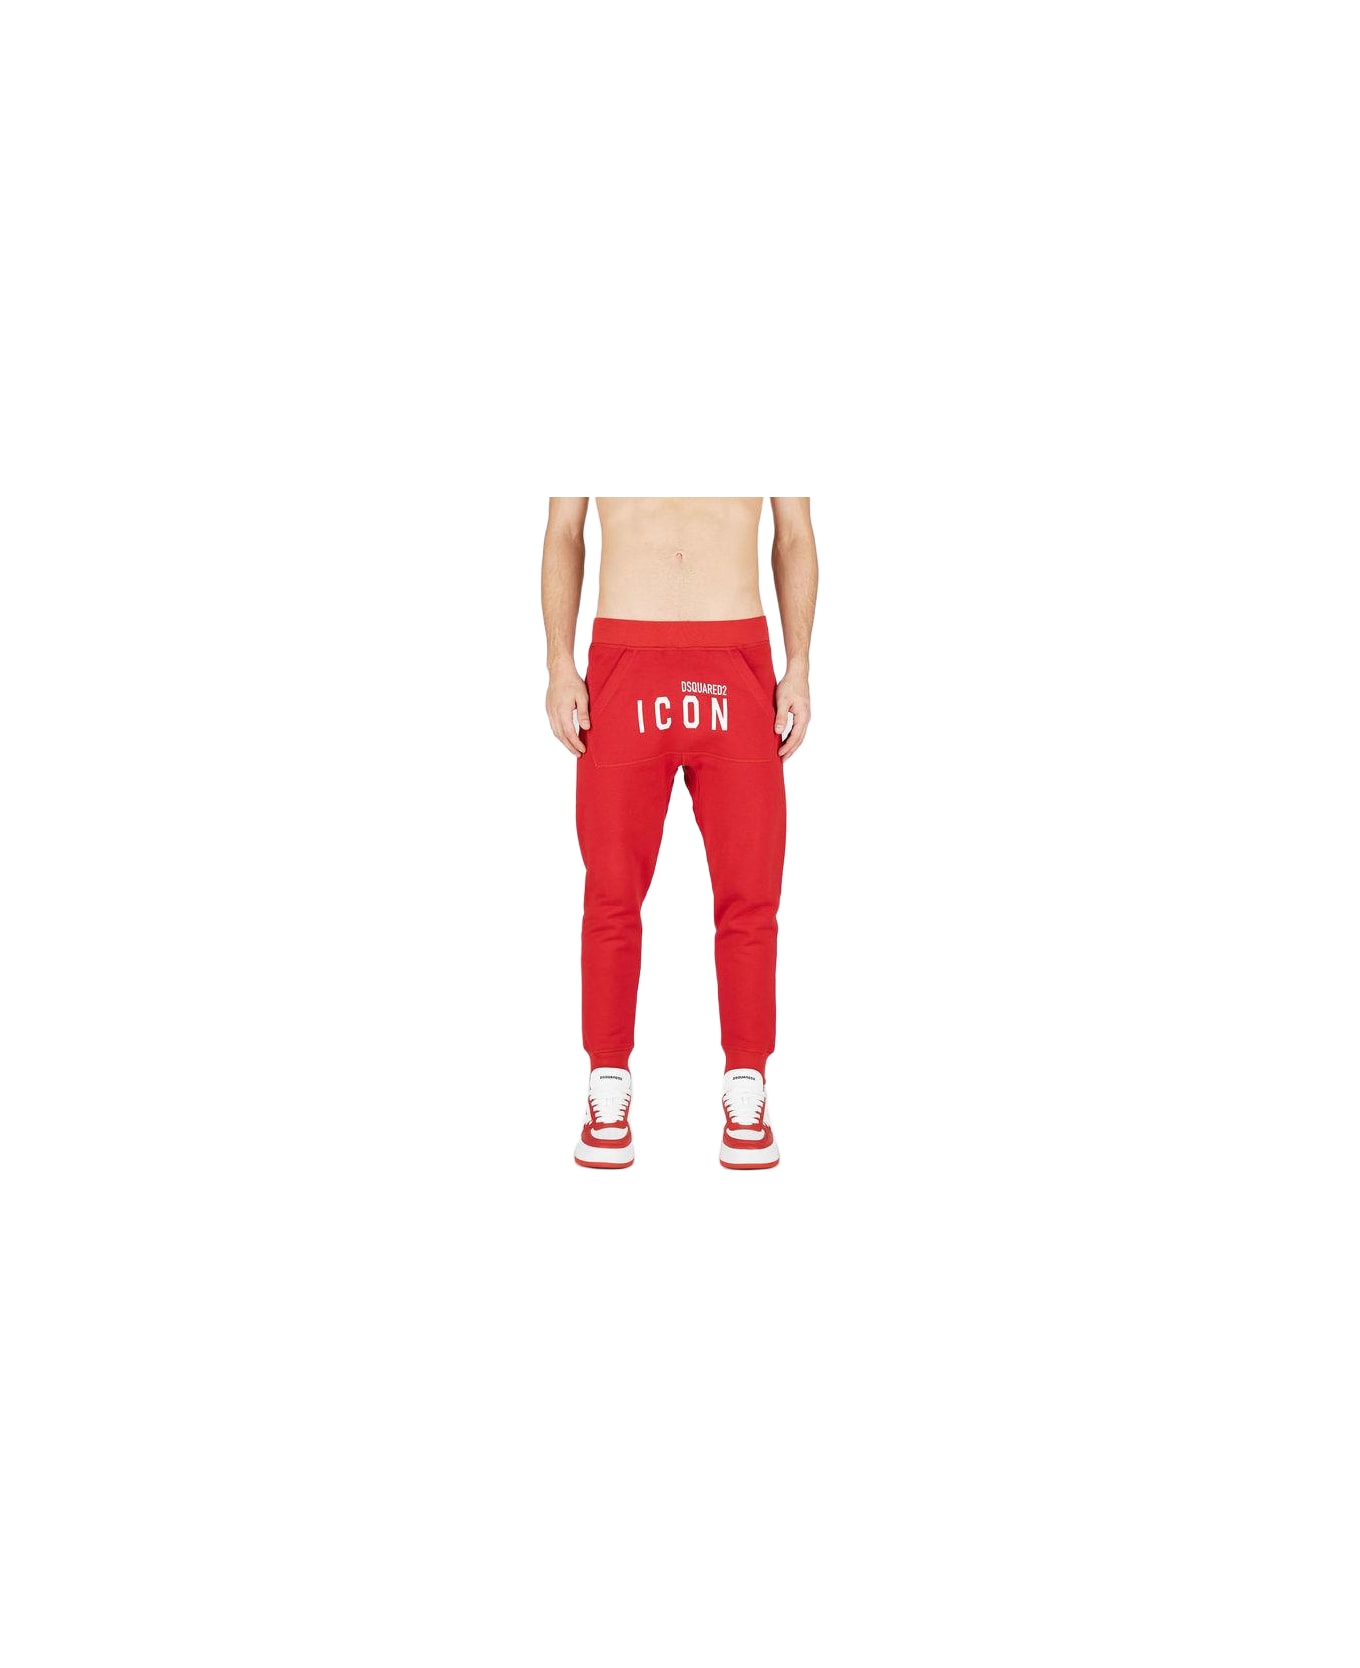 Dsquared2 Pants - Dark red